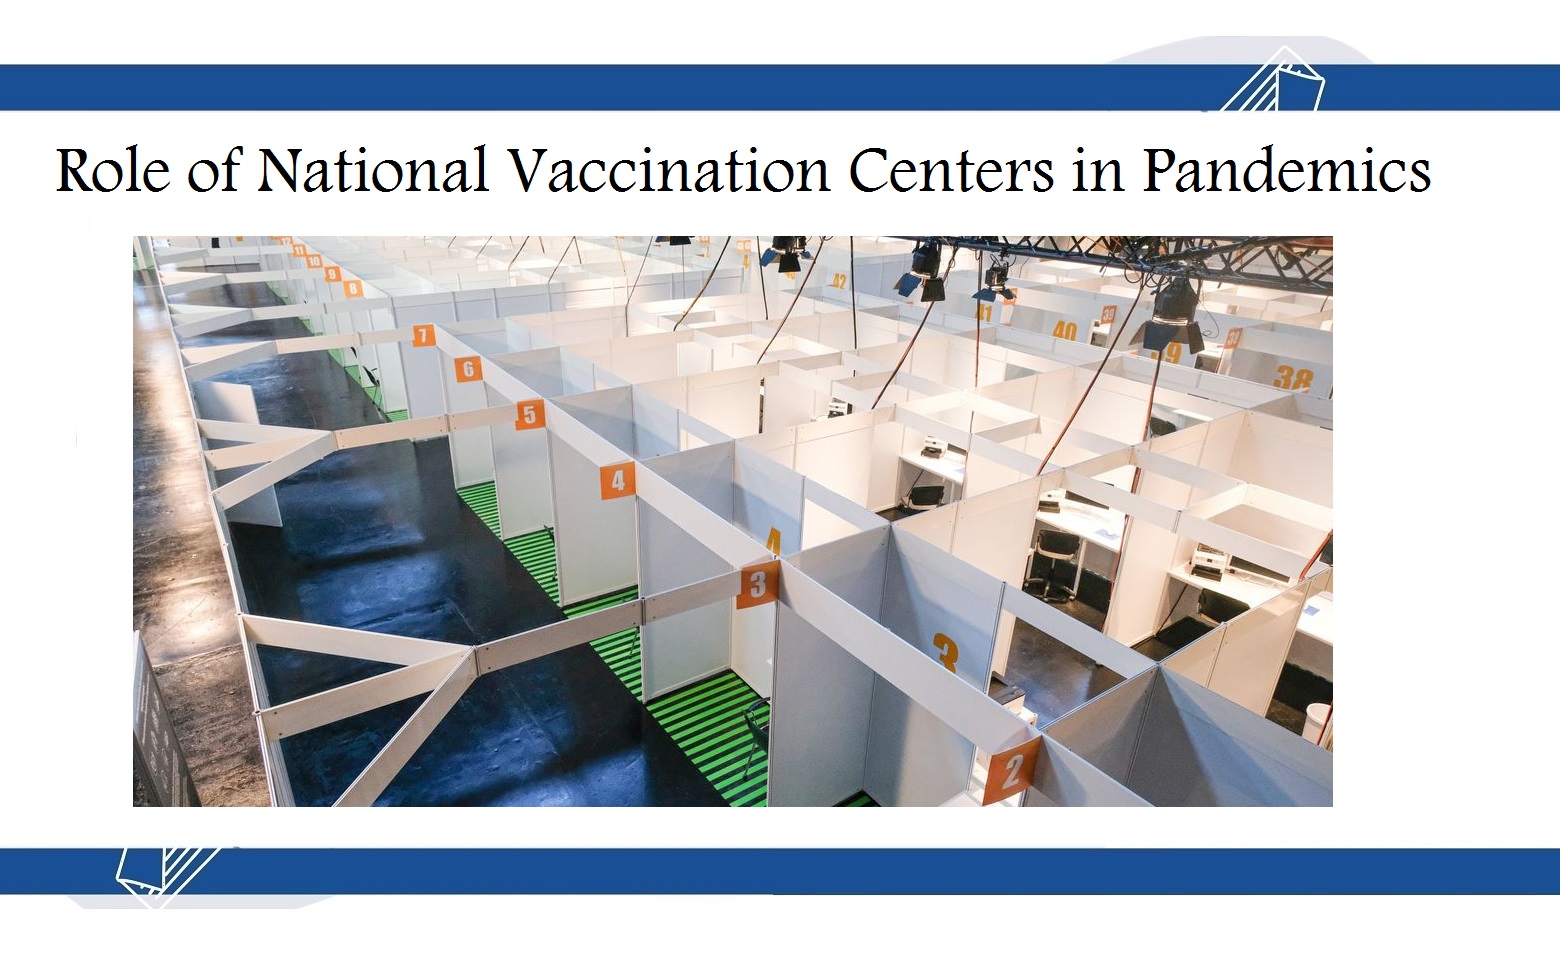 National Vaccination Centers